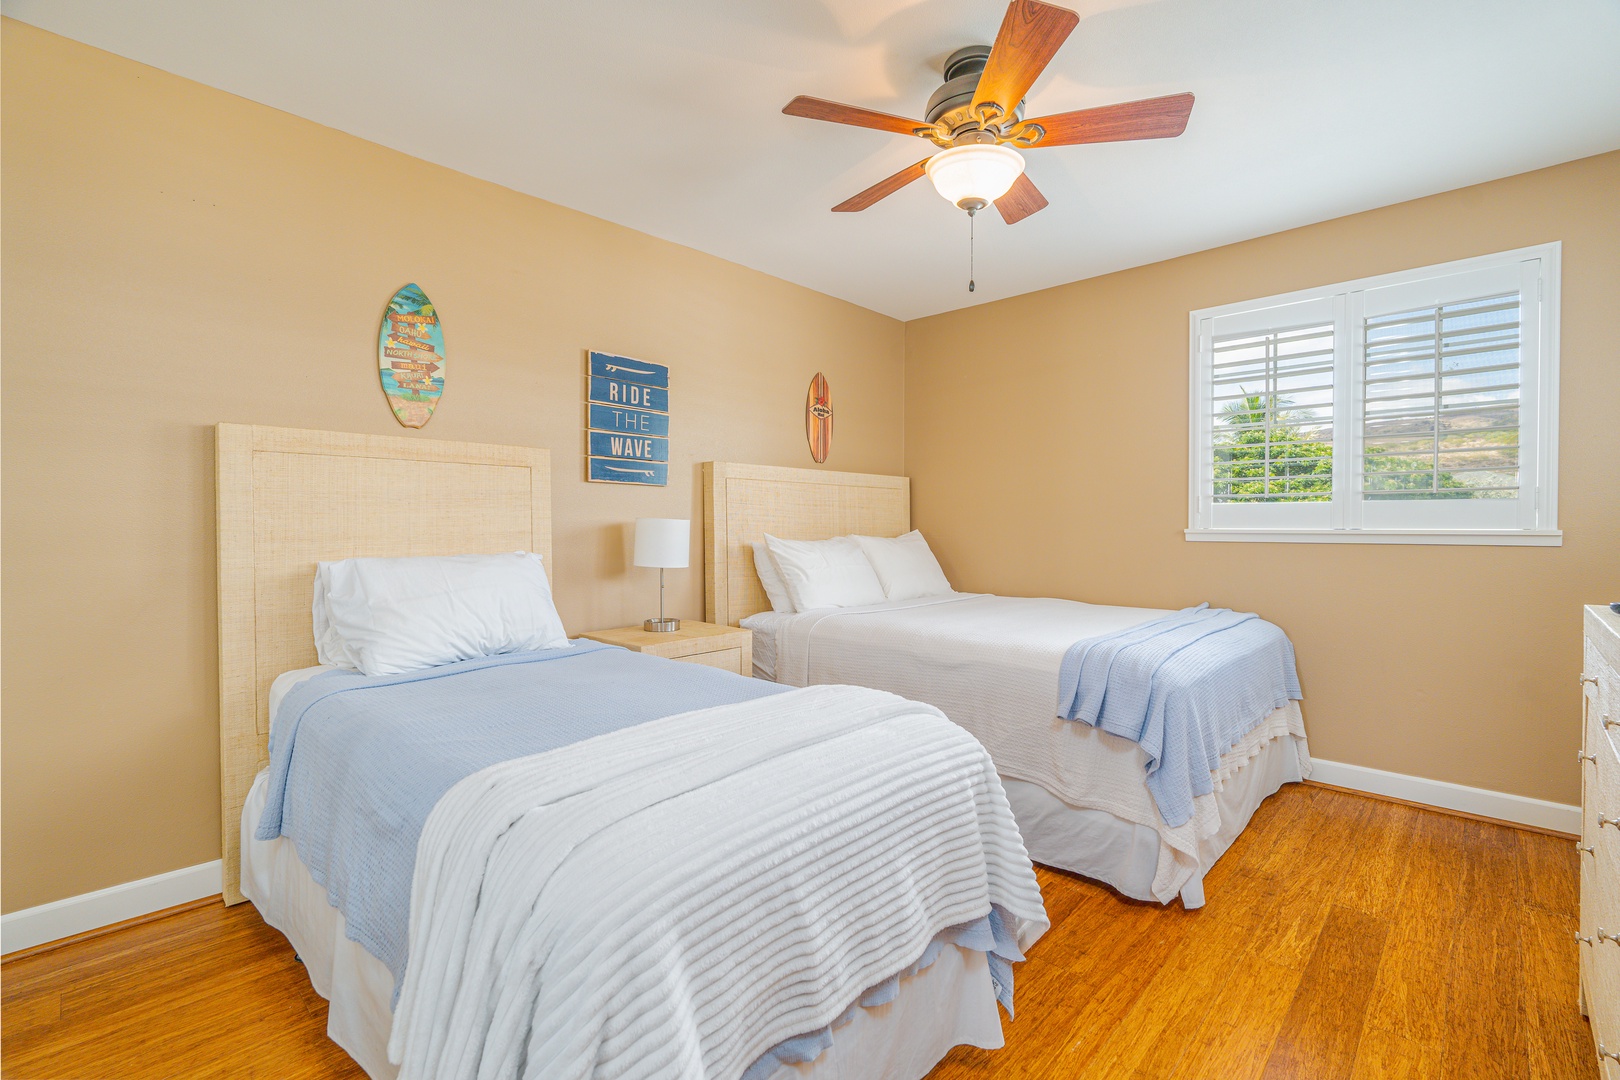 Kapolei Vacation Rentals, Ko Olina Kai 1081C - The upstairs guest bedroom with a twin bed and a queen bed.